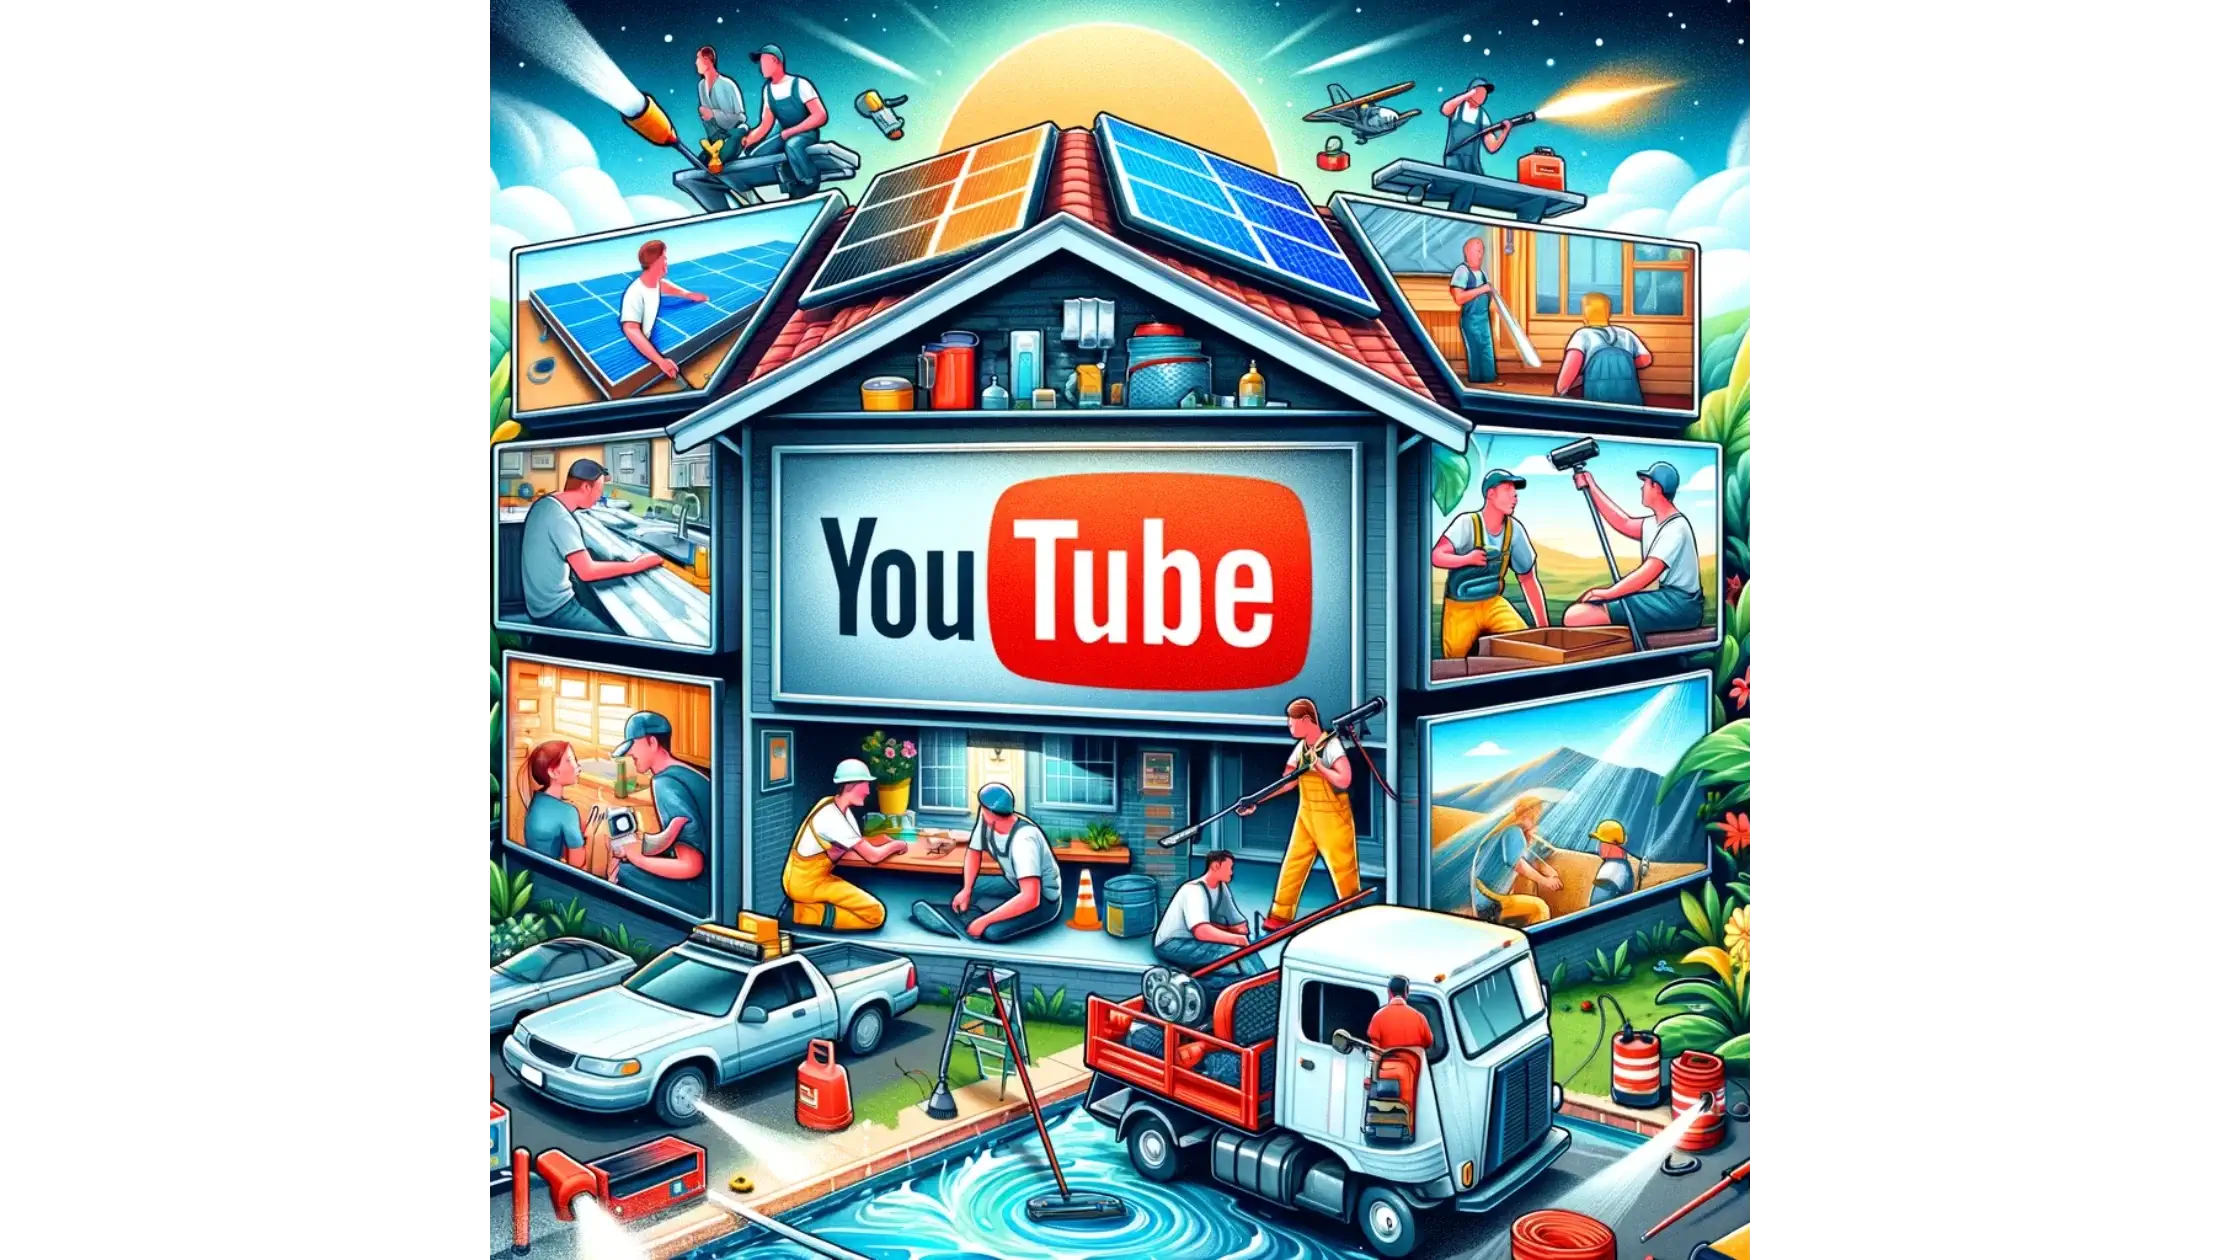 YouTube infographic image of a home built by YouTube with device screens as the walls 